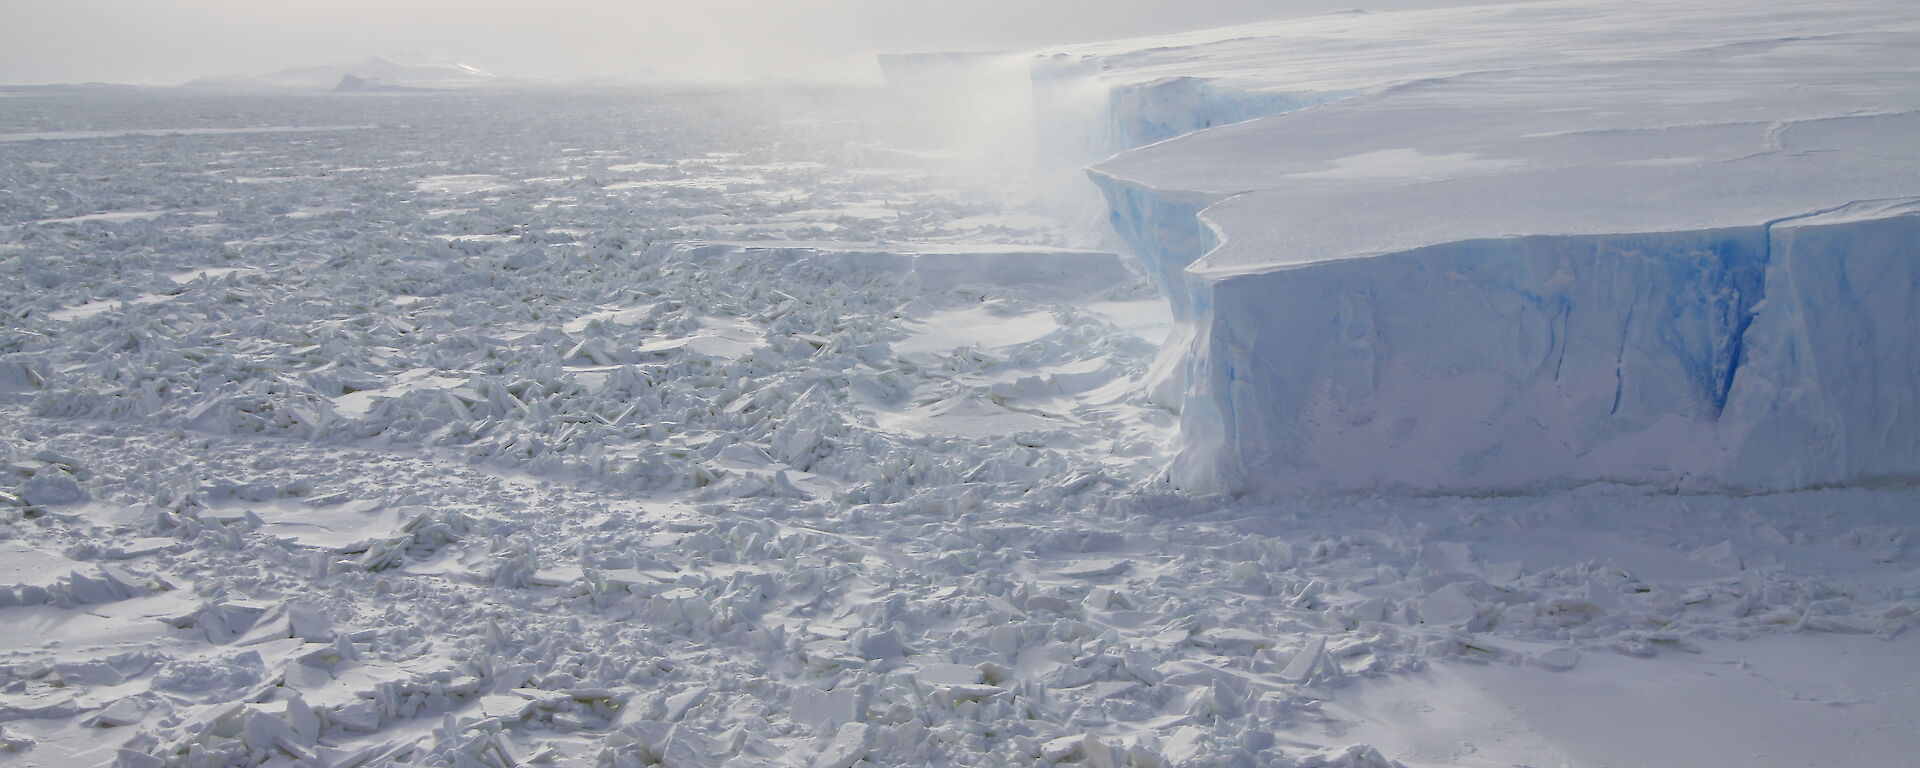 Ice cliffs above an uneven ice surface, viewed from the air.